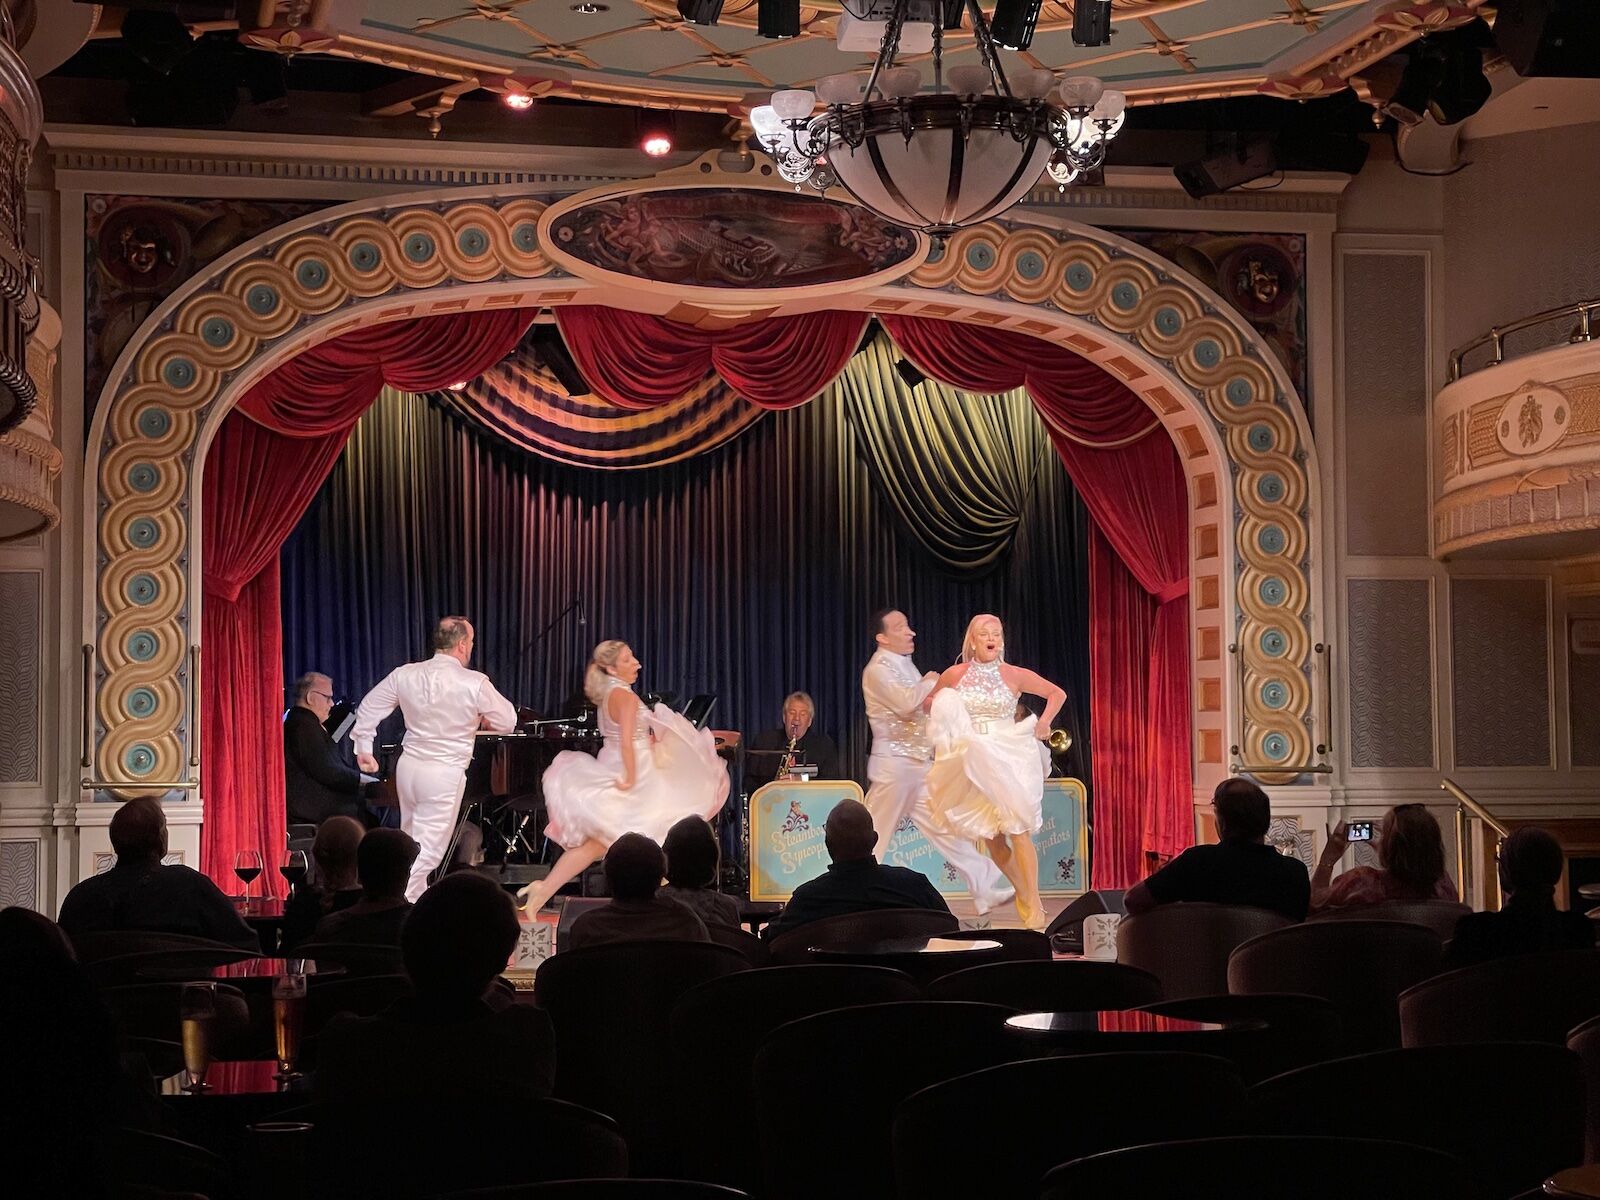 Entertainment in the Grand Saloon on the American Queen